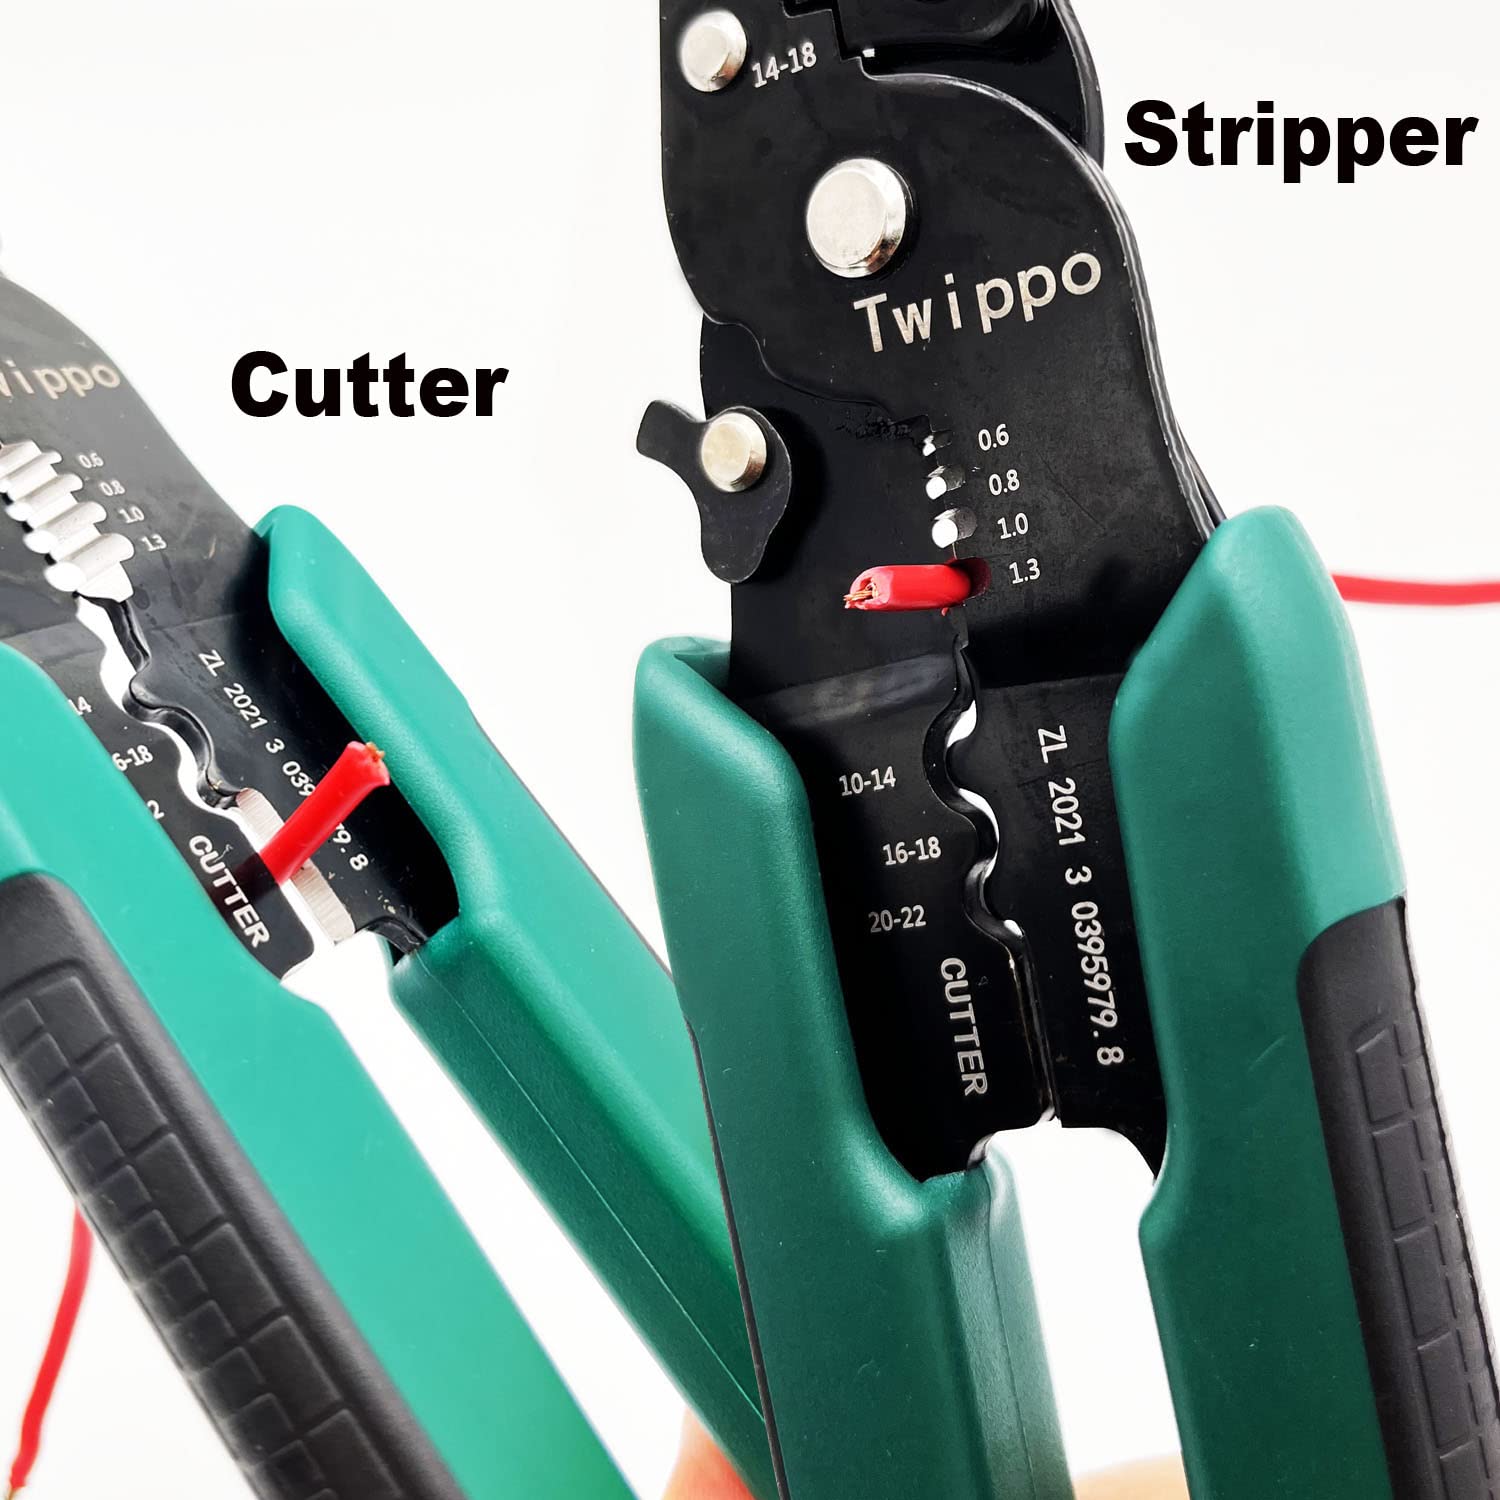 Twippo Crimping Tool, Wire Crimper Tool with Stripper Cutter, Crimping Pliers for Open Barrel Terminals and Heat Shrink Connectors, Crimping for 26-10 AWG, Stripping for 22-16 AWG